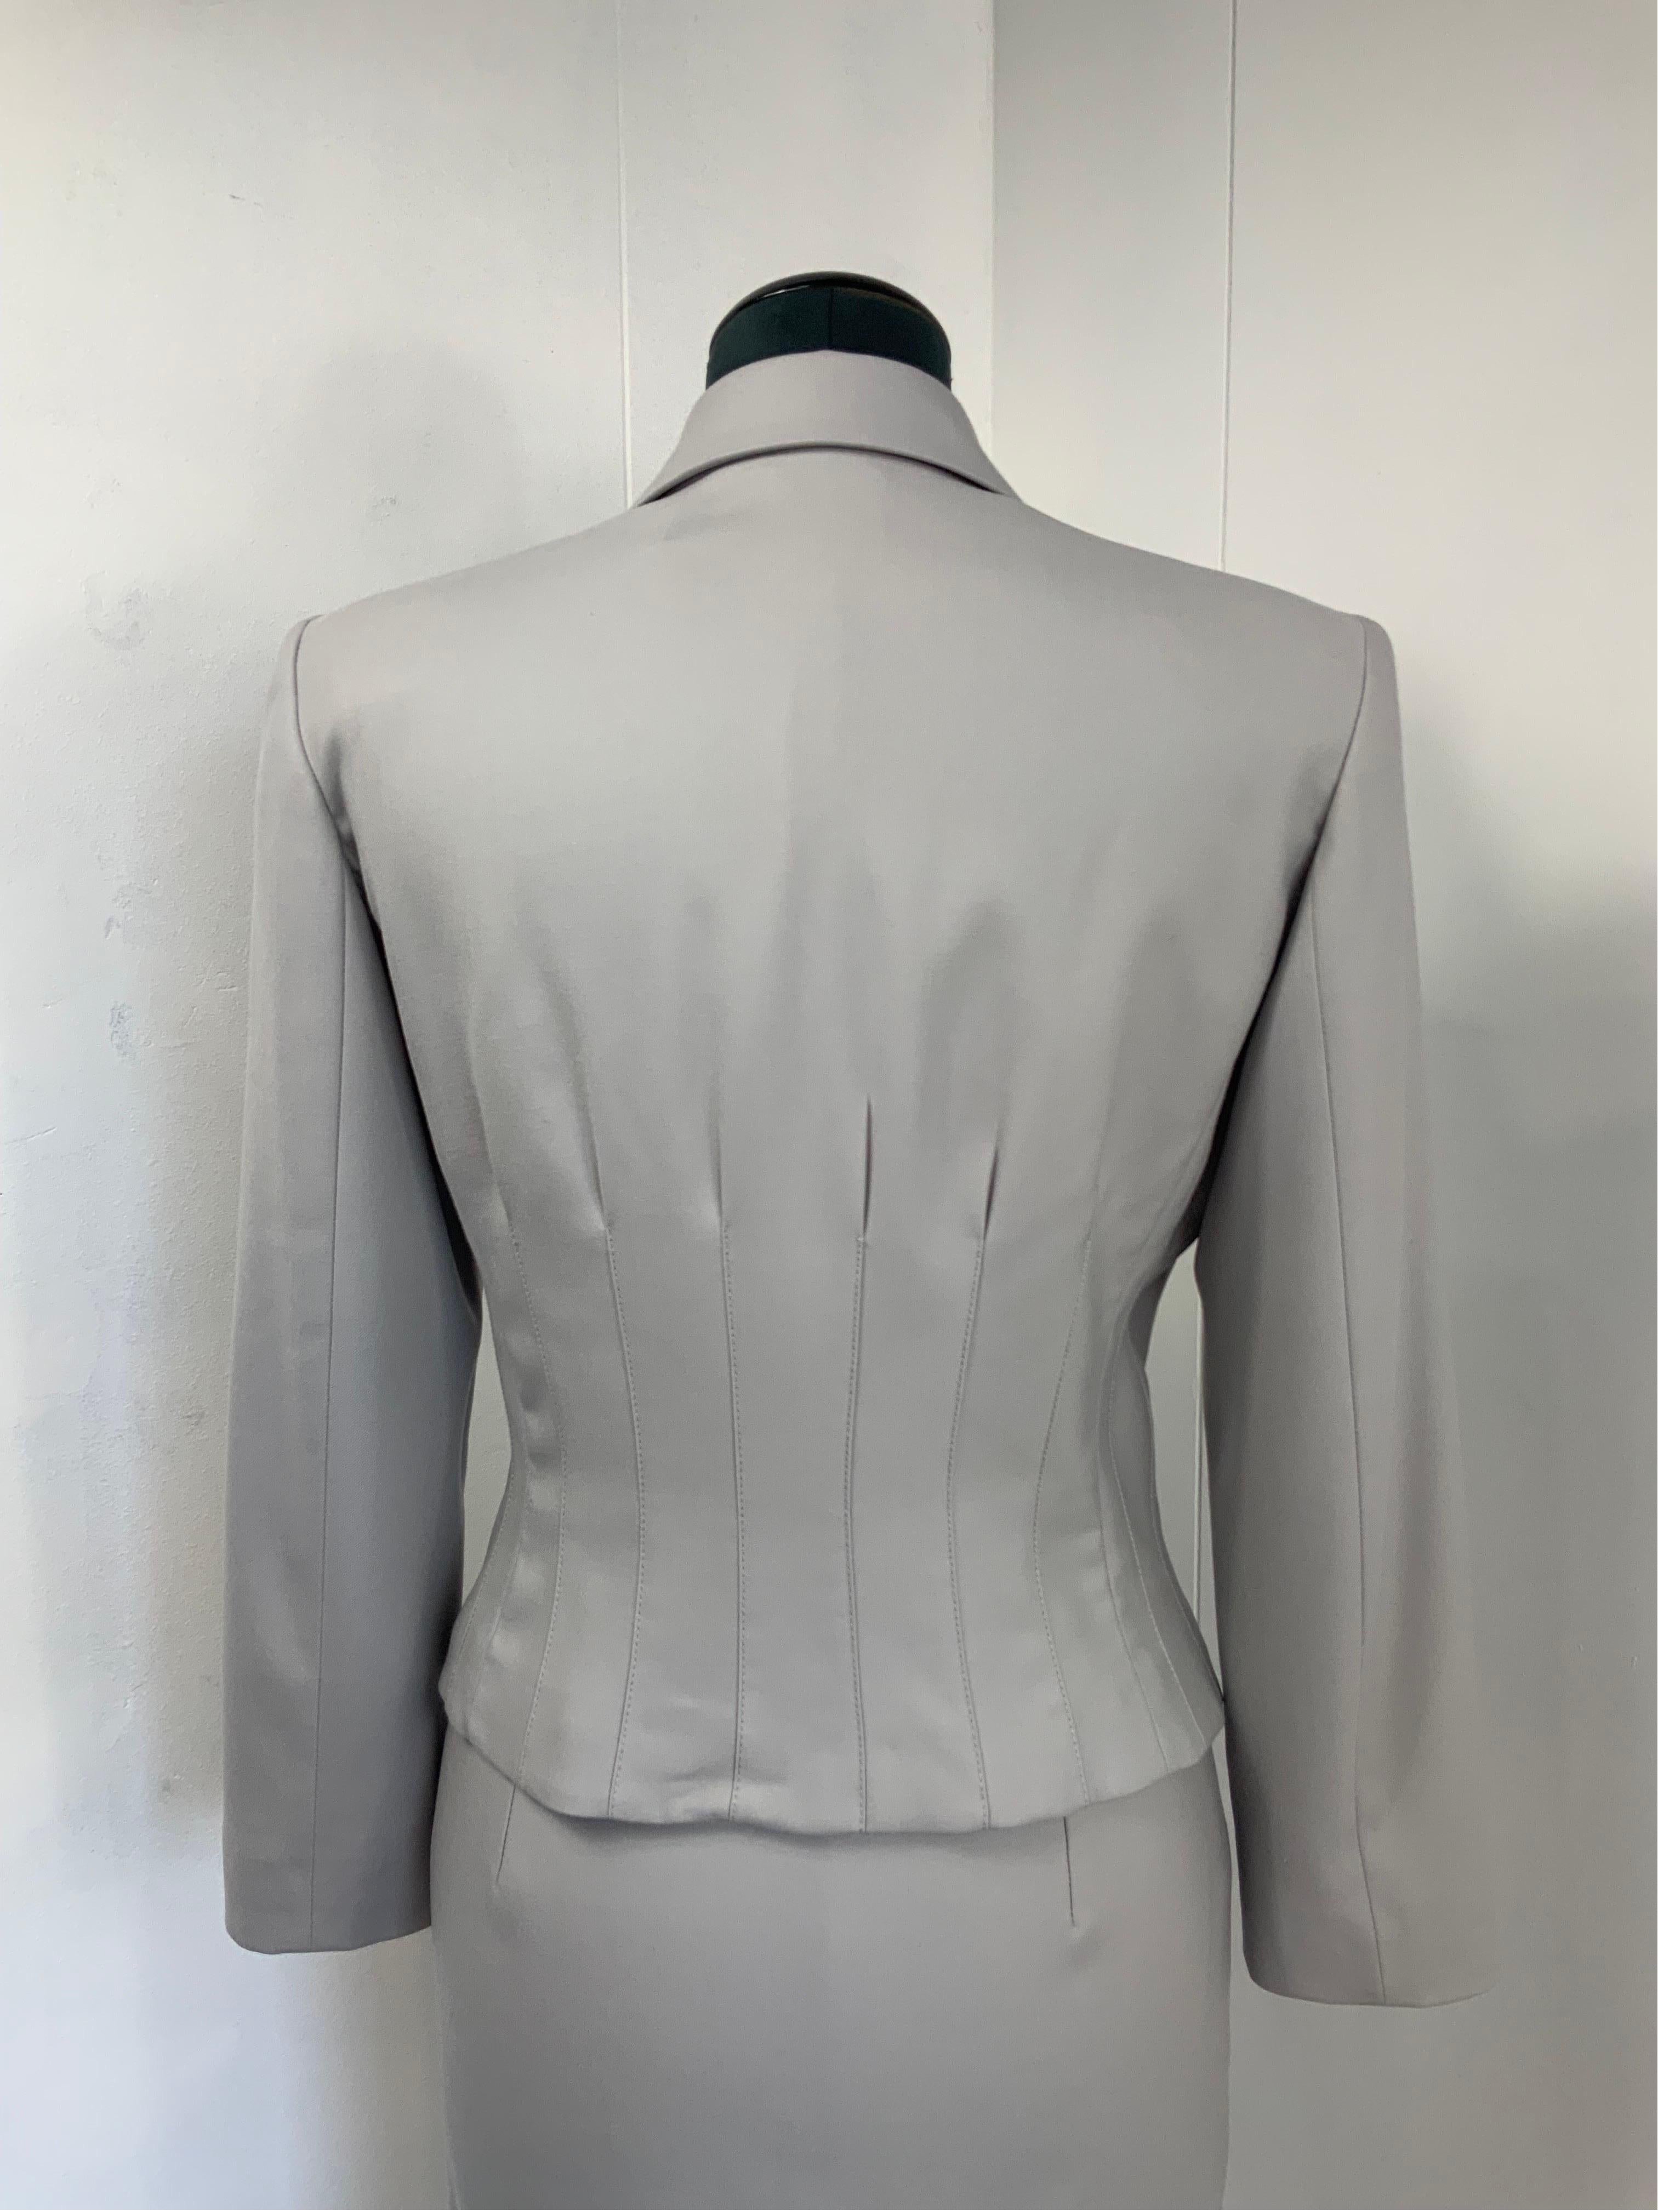 Gianni Versace Vintage 90s Suit In Good Condition For Sale In Carnate, IT